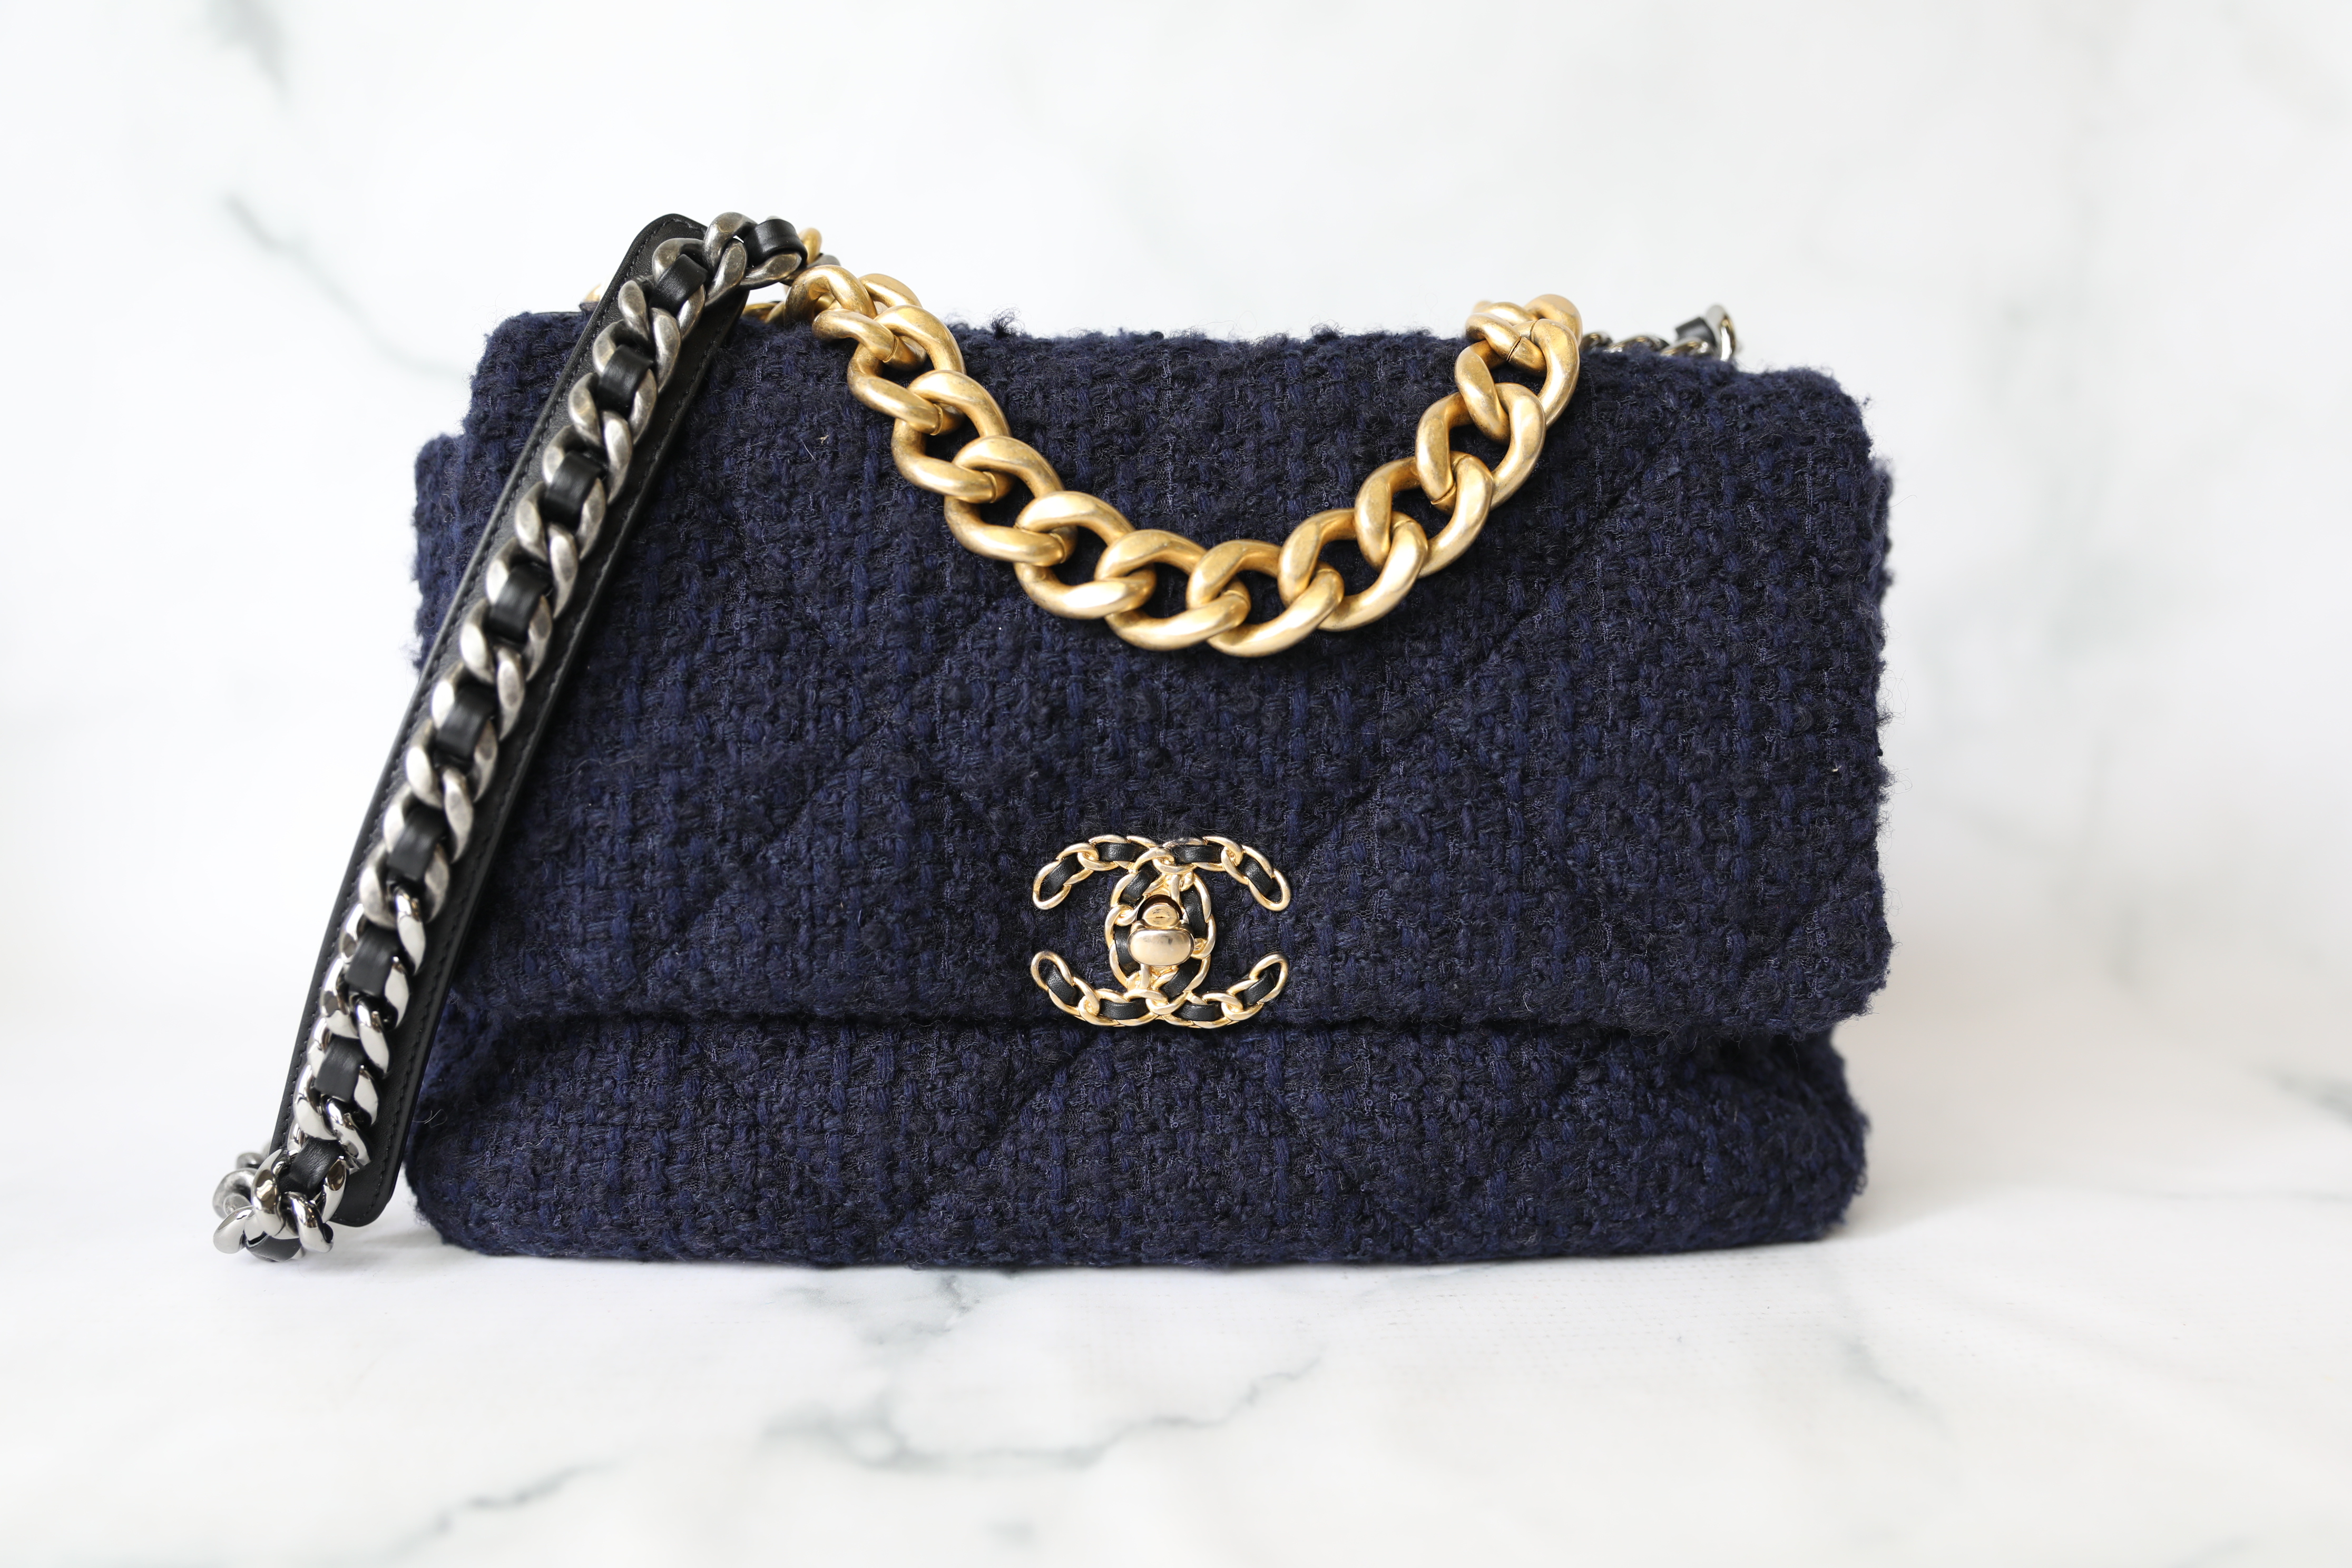 Chanel 19 Large, Navy Tweed, Preowned in Dustbag WA001 - Julia Rose Boston